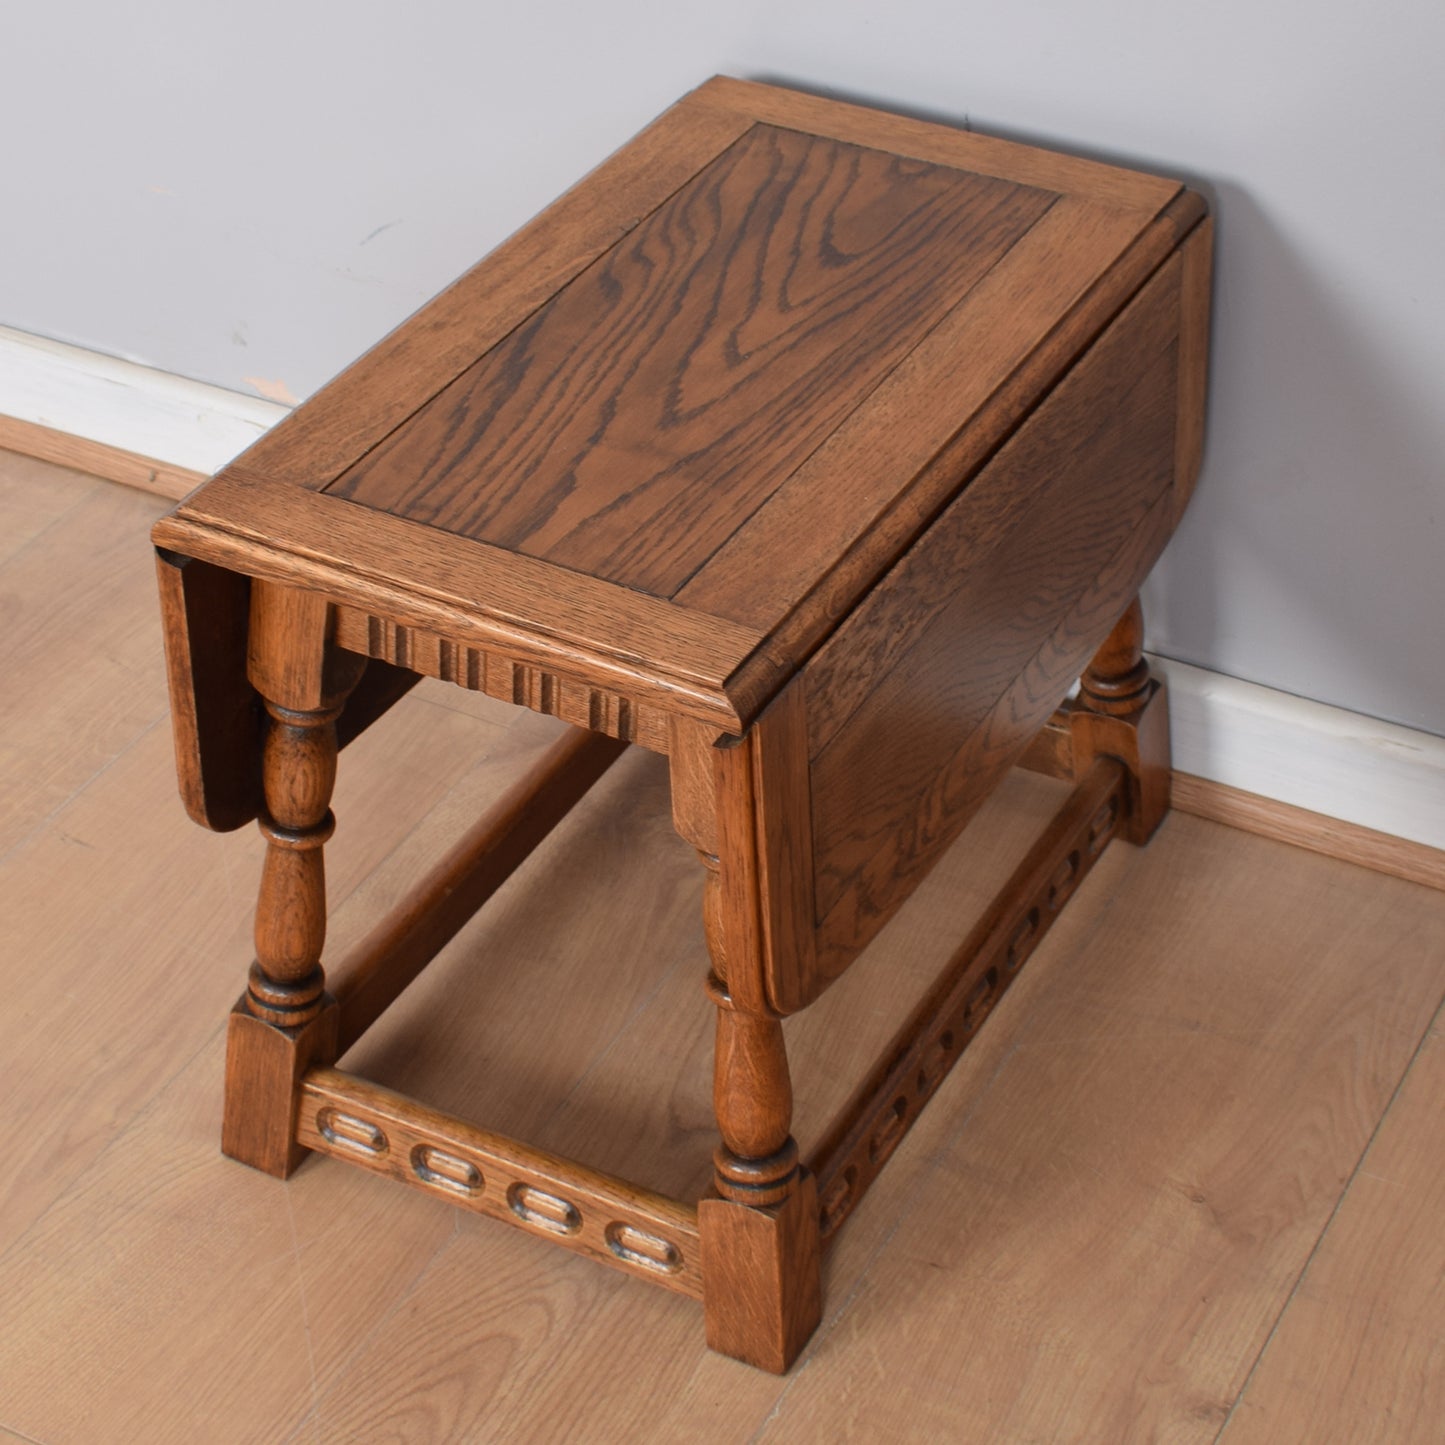 Small Drop-Leaf Table